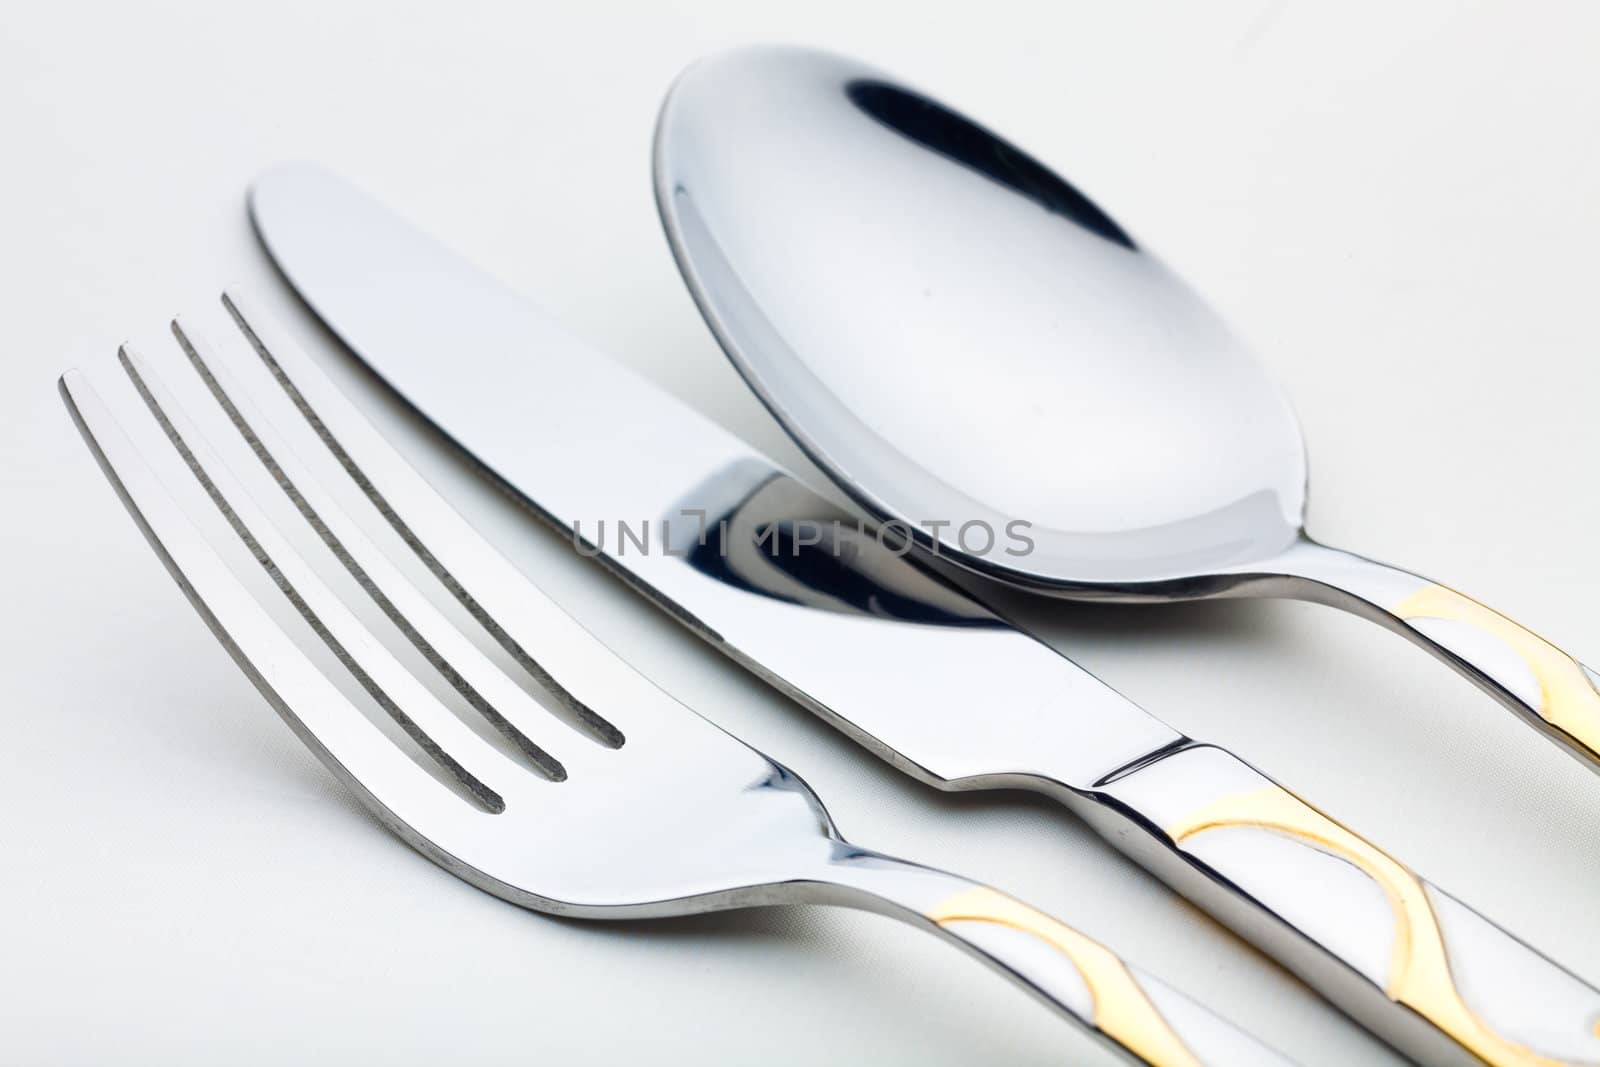 Chrome-plated spoon, a knife and fork are on the white tablecloth. Frame close-ups